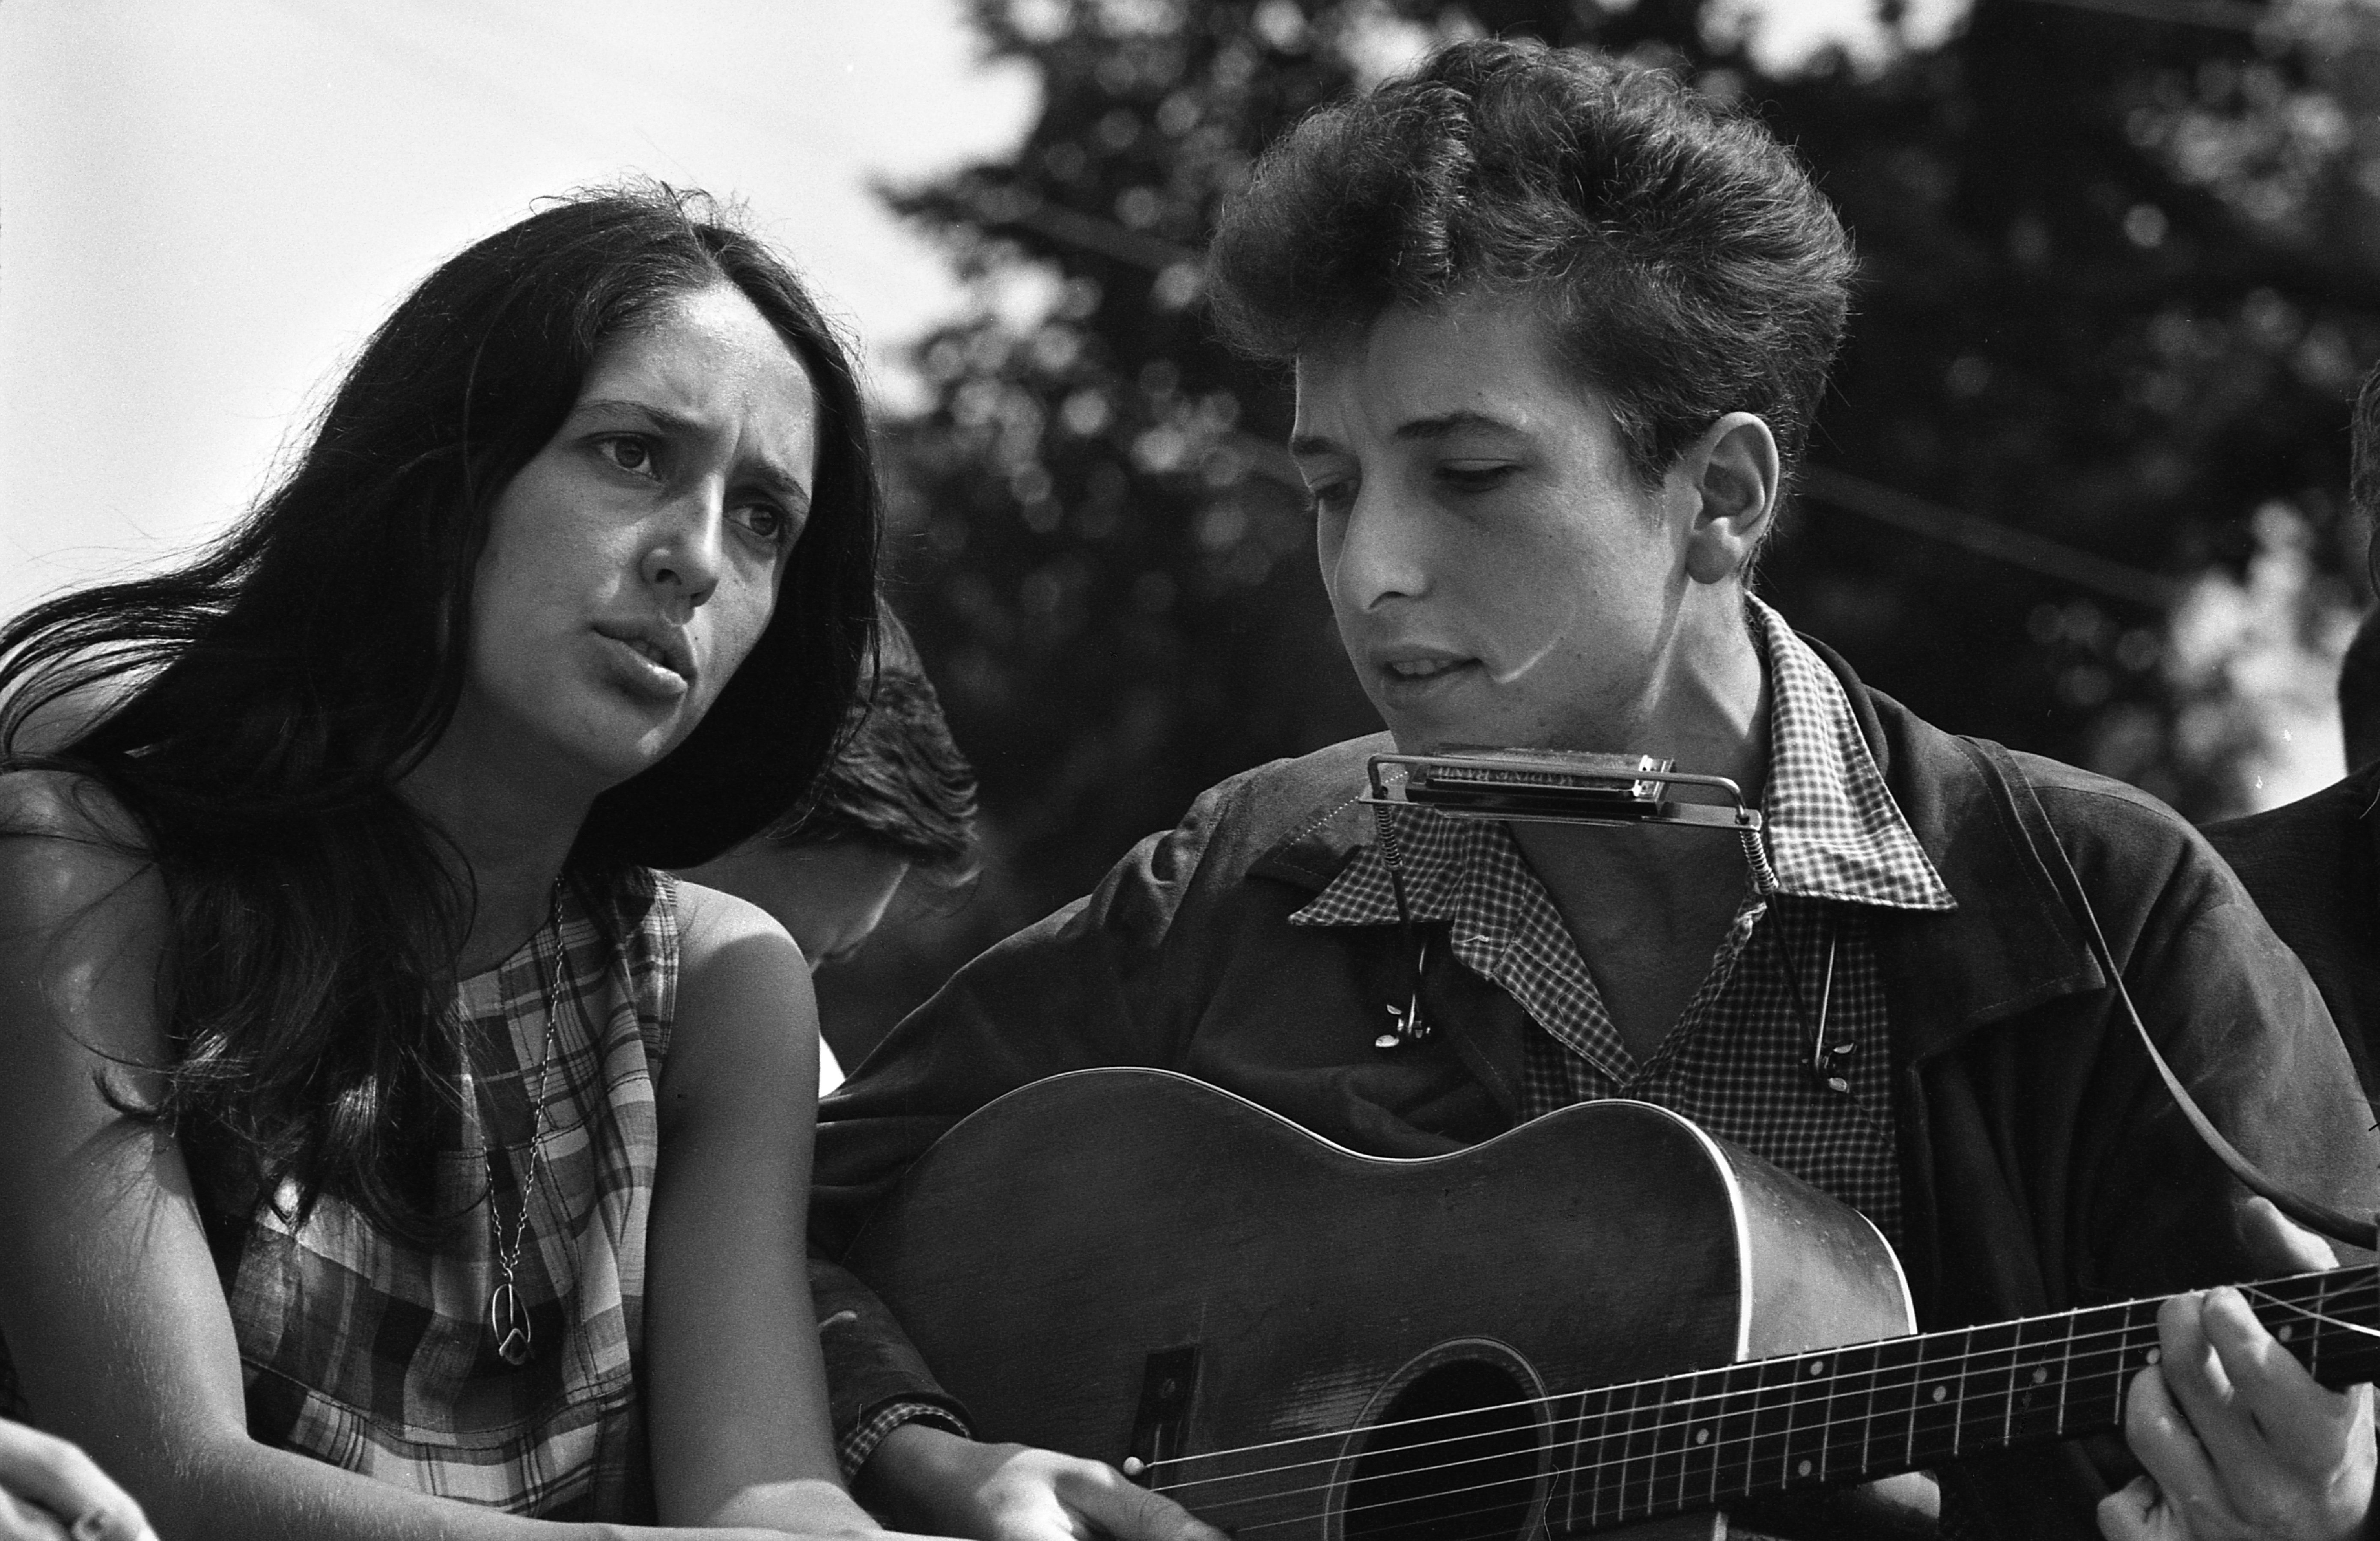 Joan Baez and Bob Dylan performing during the March on Washington civil rights rally, on August 28, 1963 | Source: Getty Images